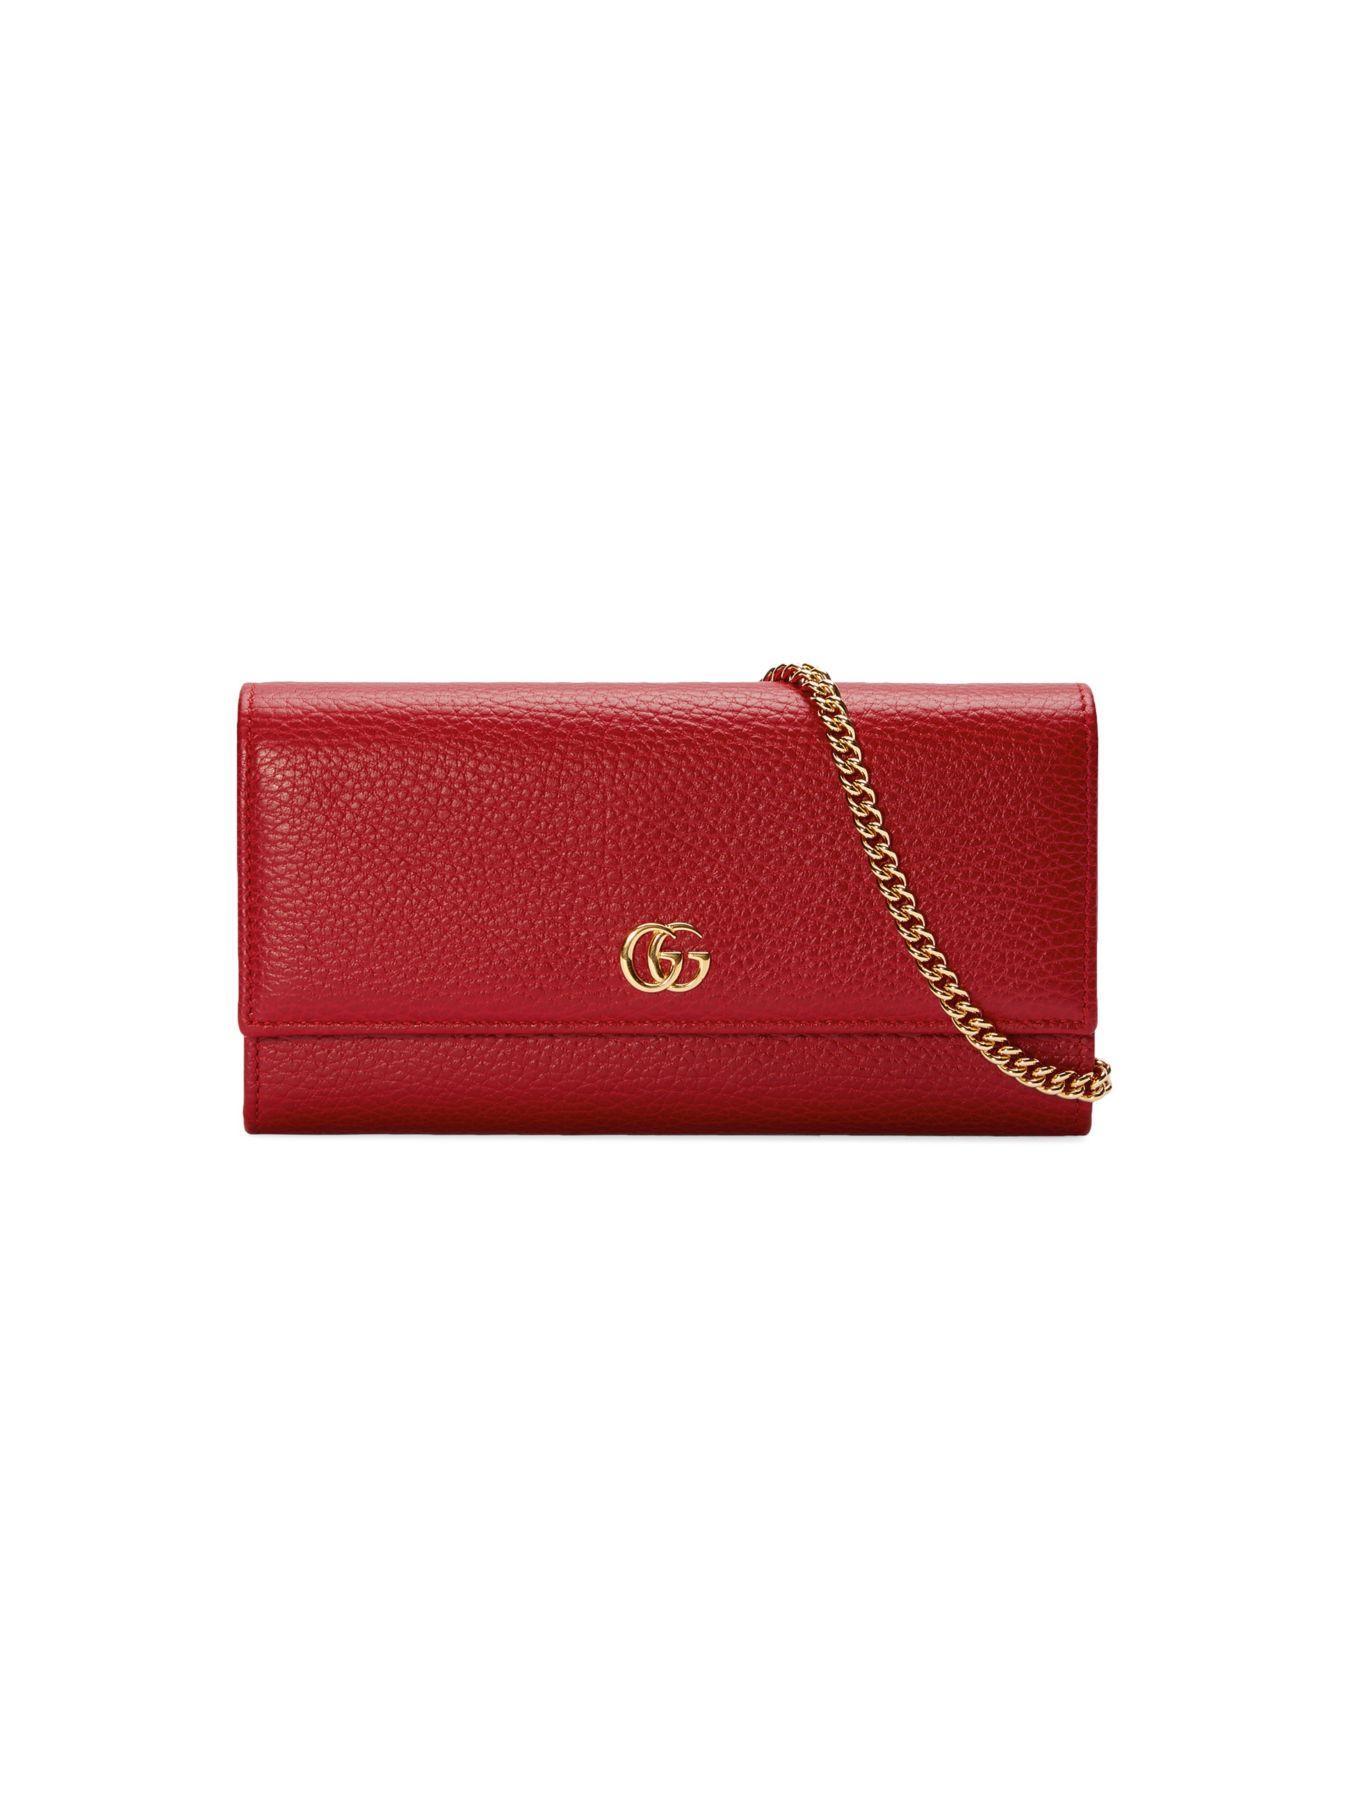 Gucci Marmont Leather Continental Wallet On A Chain in Red (Pink) - Save 6% - Lyst